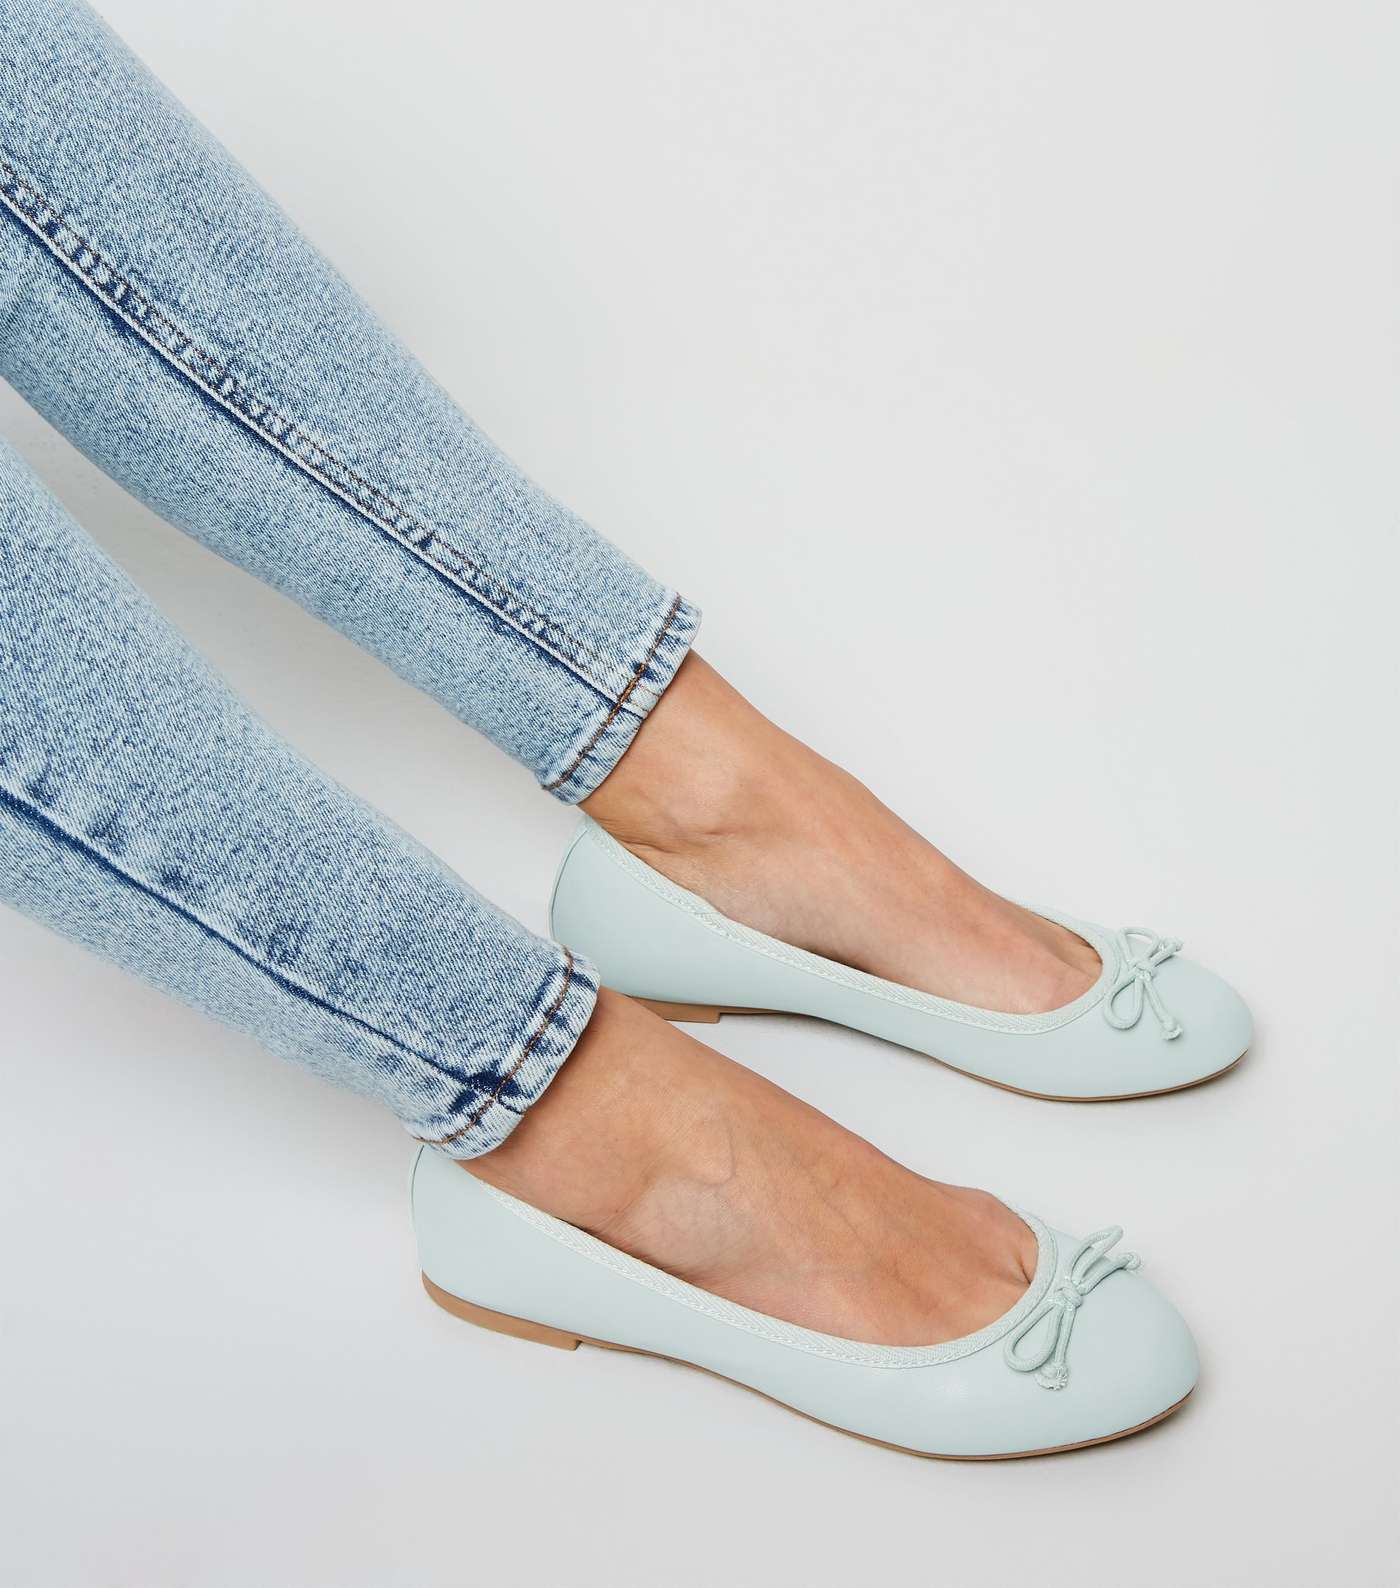 Mint Green Leather-look Ballet Pumps Image 2